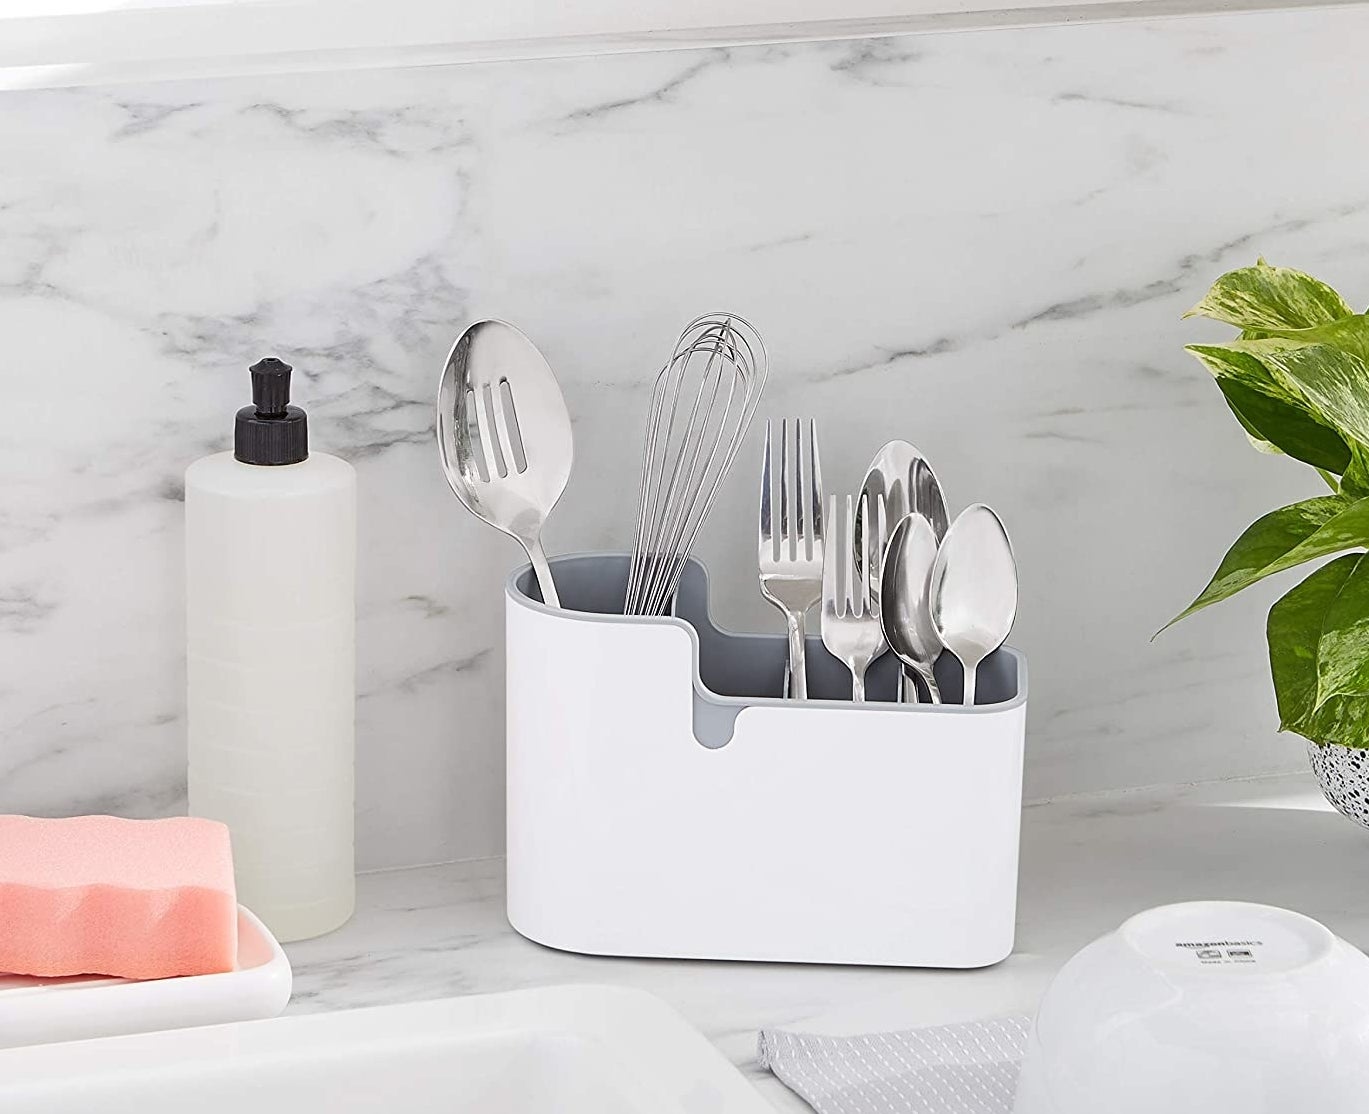 the countertop organizer filled with forks and knives